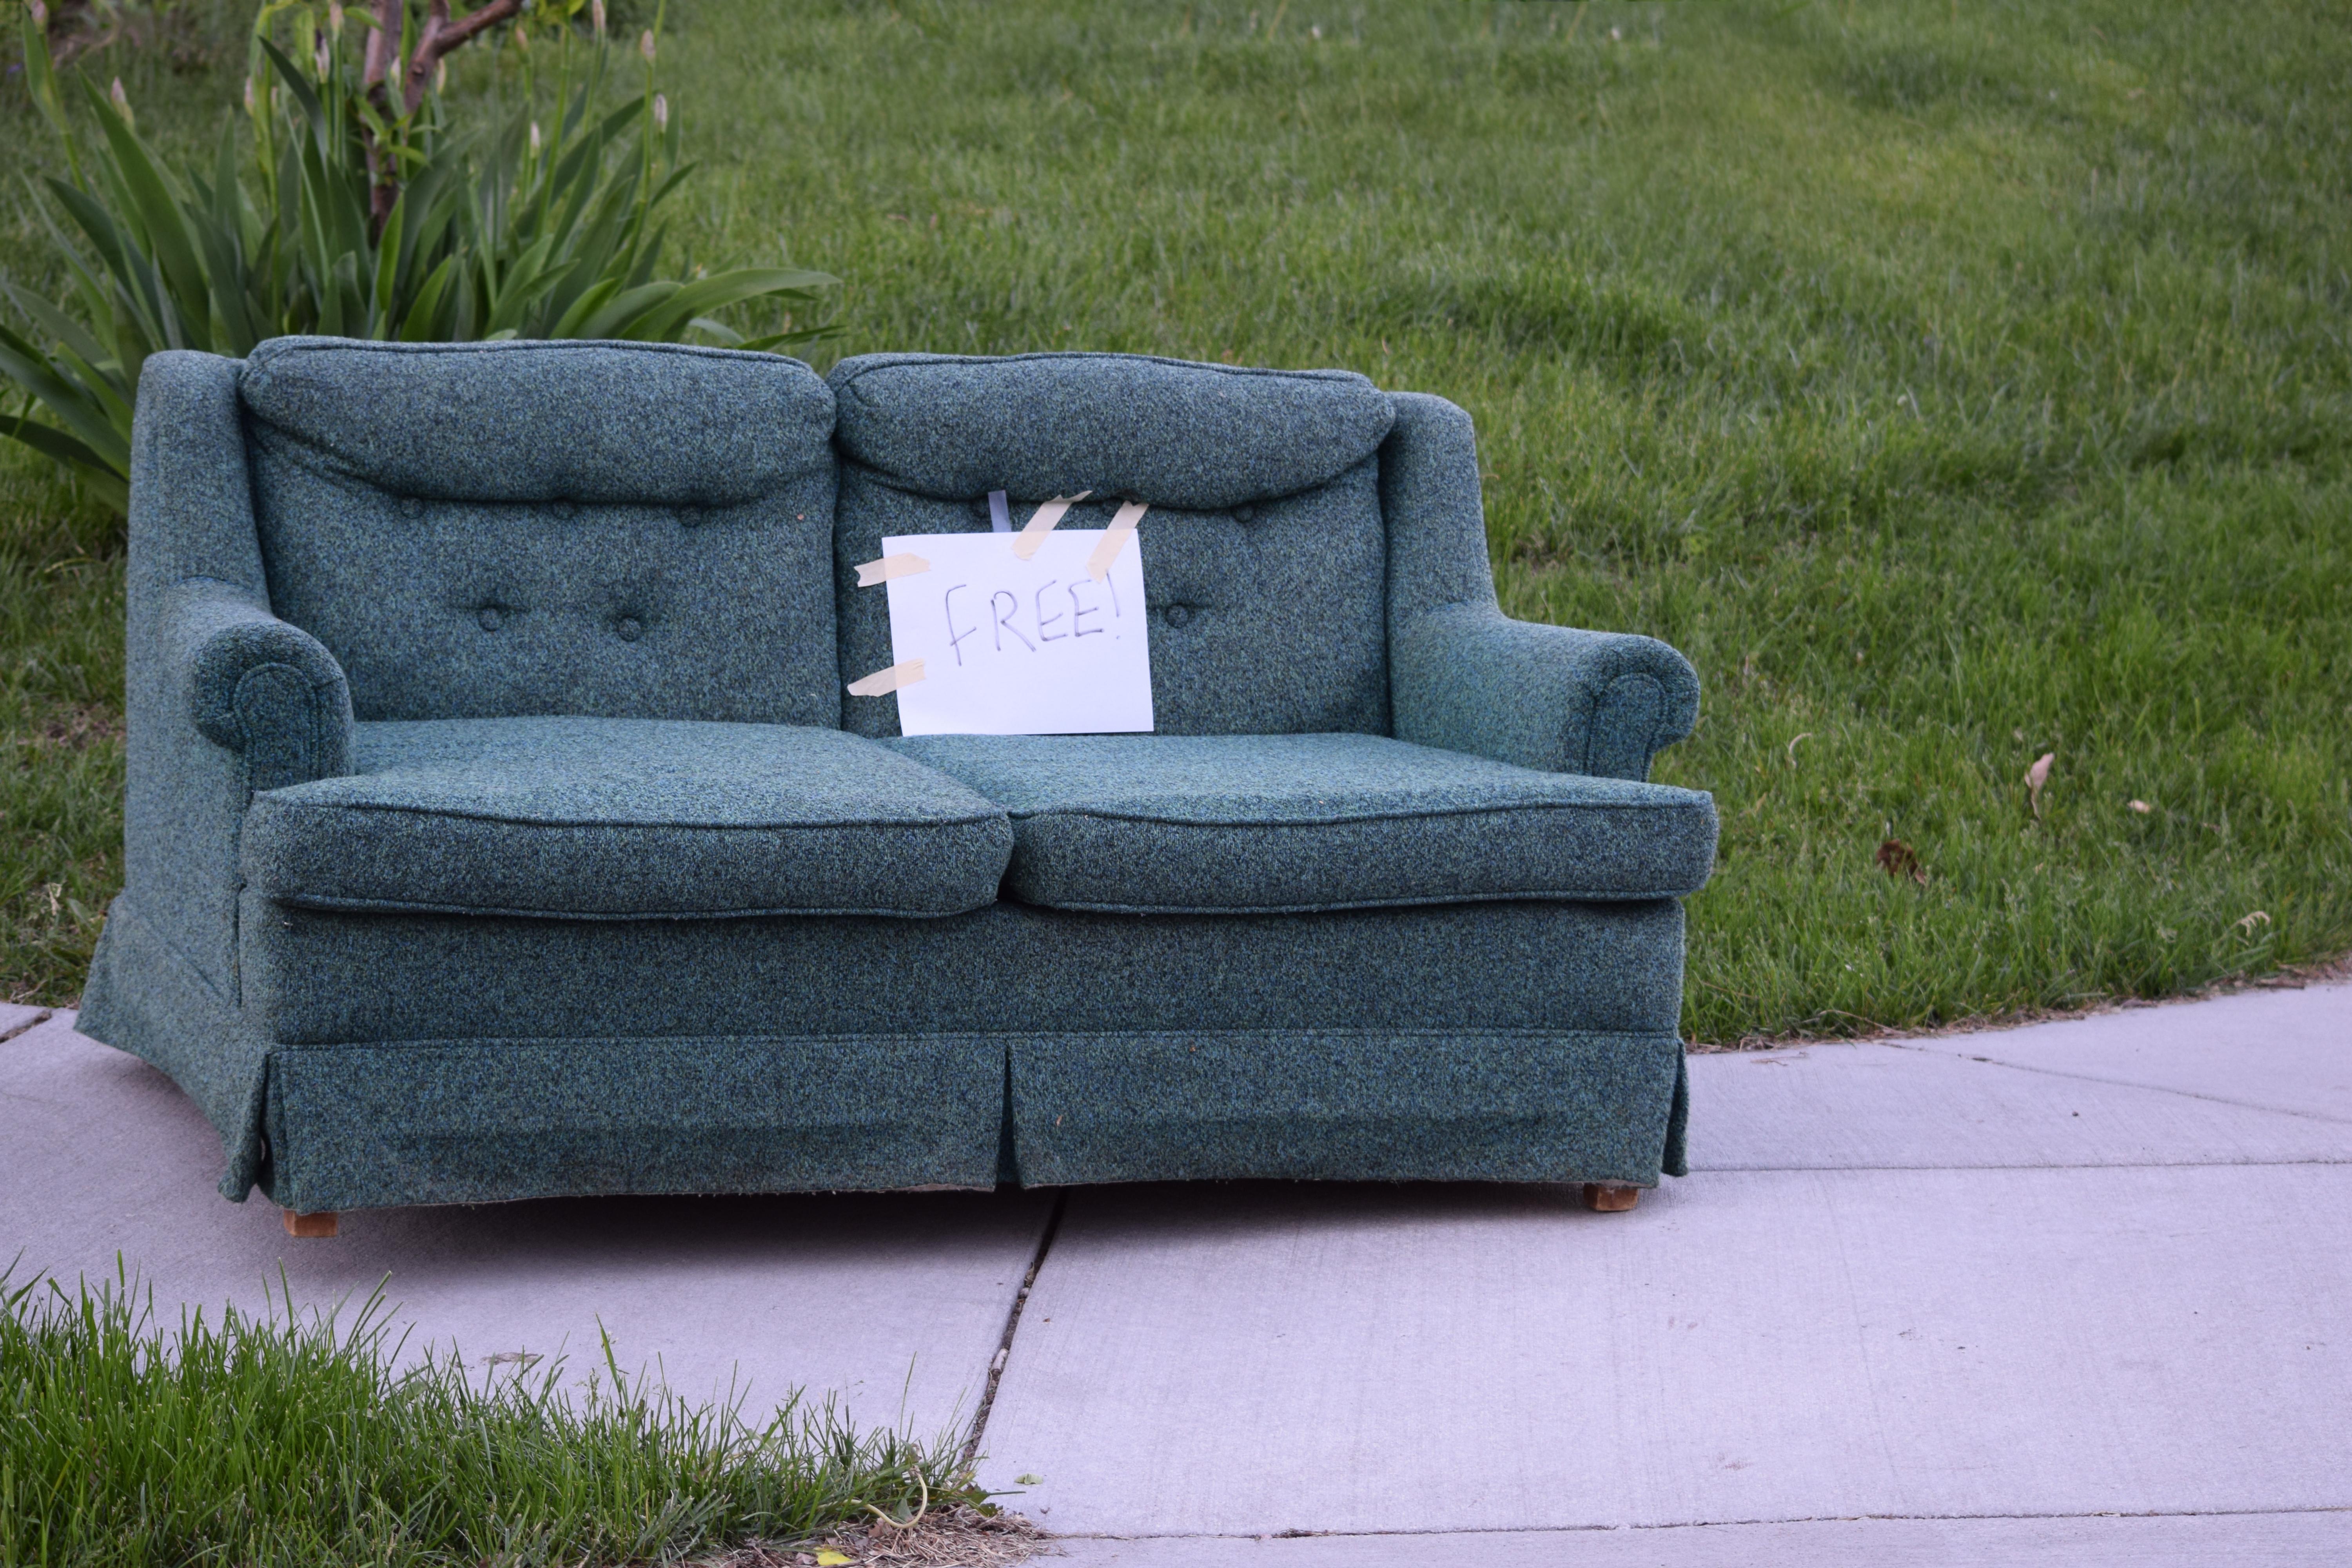 A blue couch with a "free sign" on a sidewalk